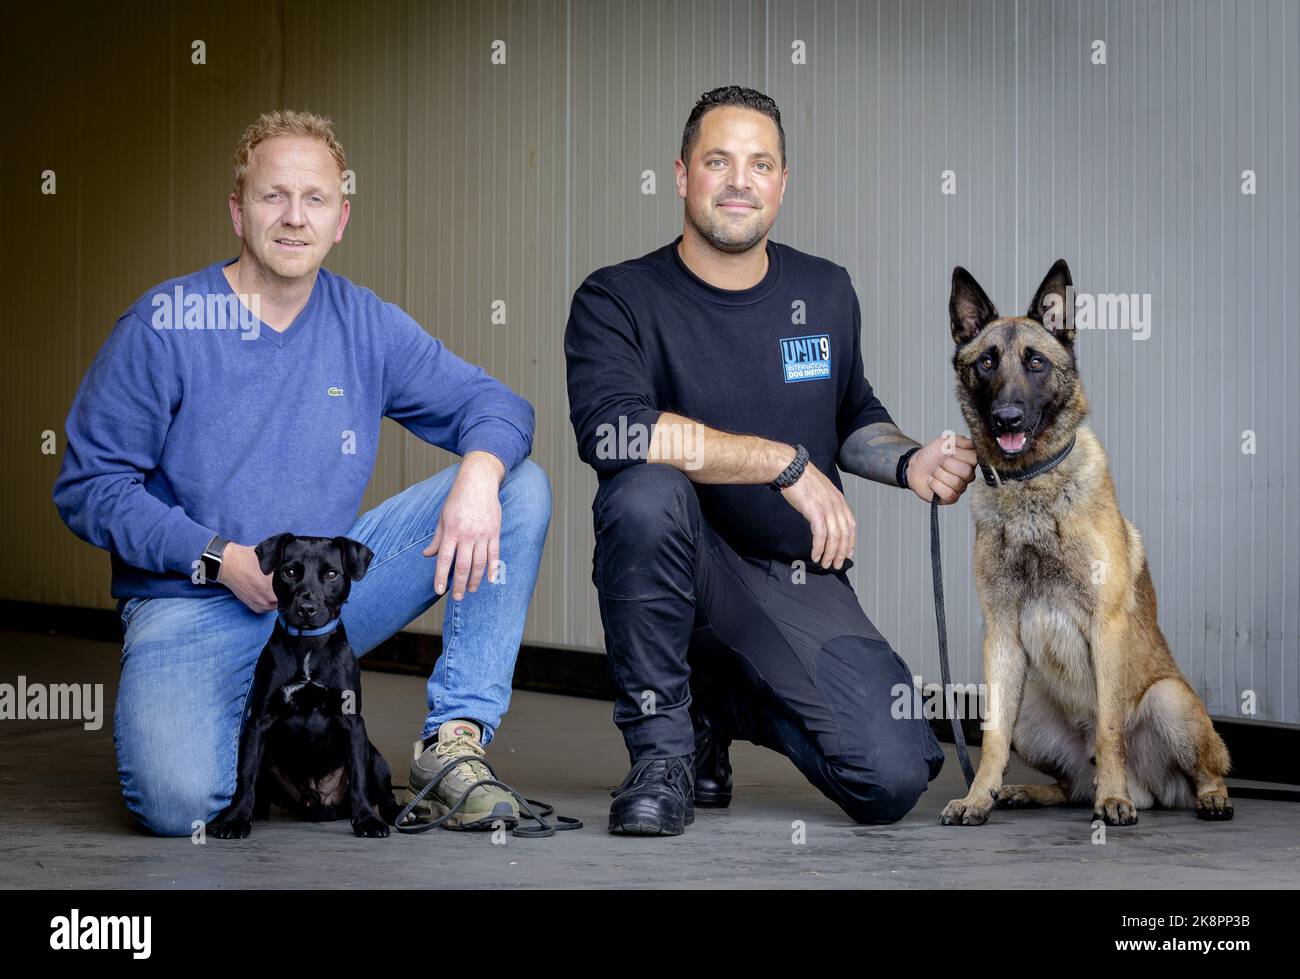 2022-10-24 17:00:37 AMSTERDAM - Trainer Erik with dog Bizzy (l) and trainer Jody with dog Ringo. The dogs will help soldiers in Nepal in the fight against poaching of red pandas. ANP ROBIN VAN LONKHUIJSEN netherlands out - belgium out Stock Photo